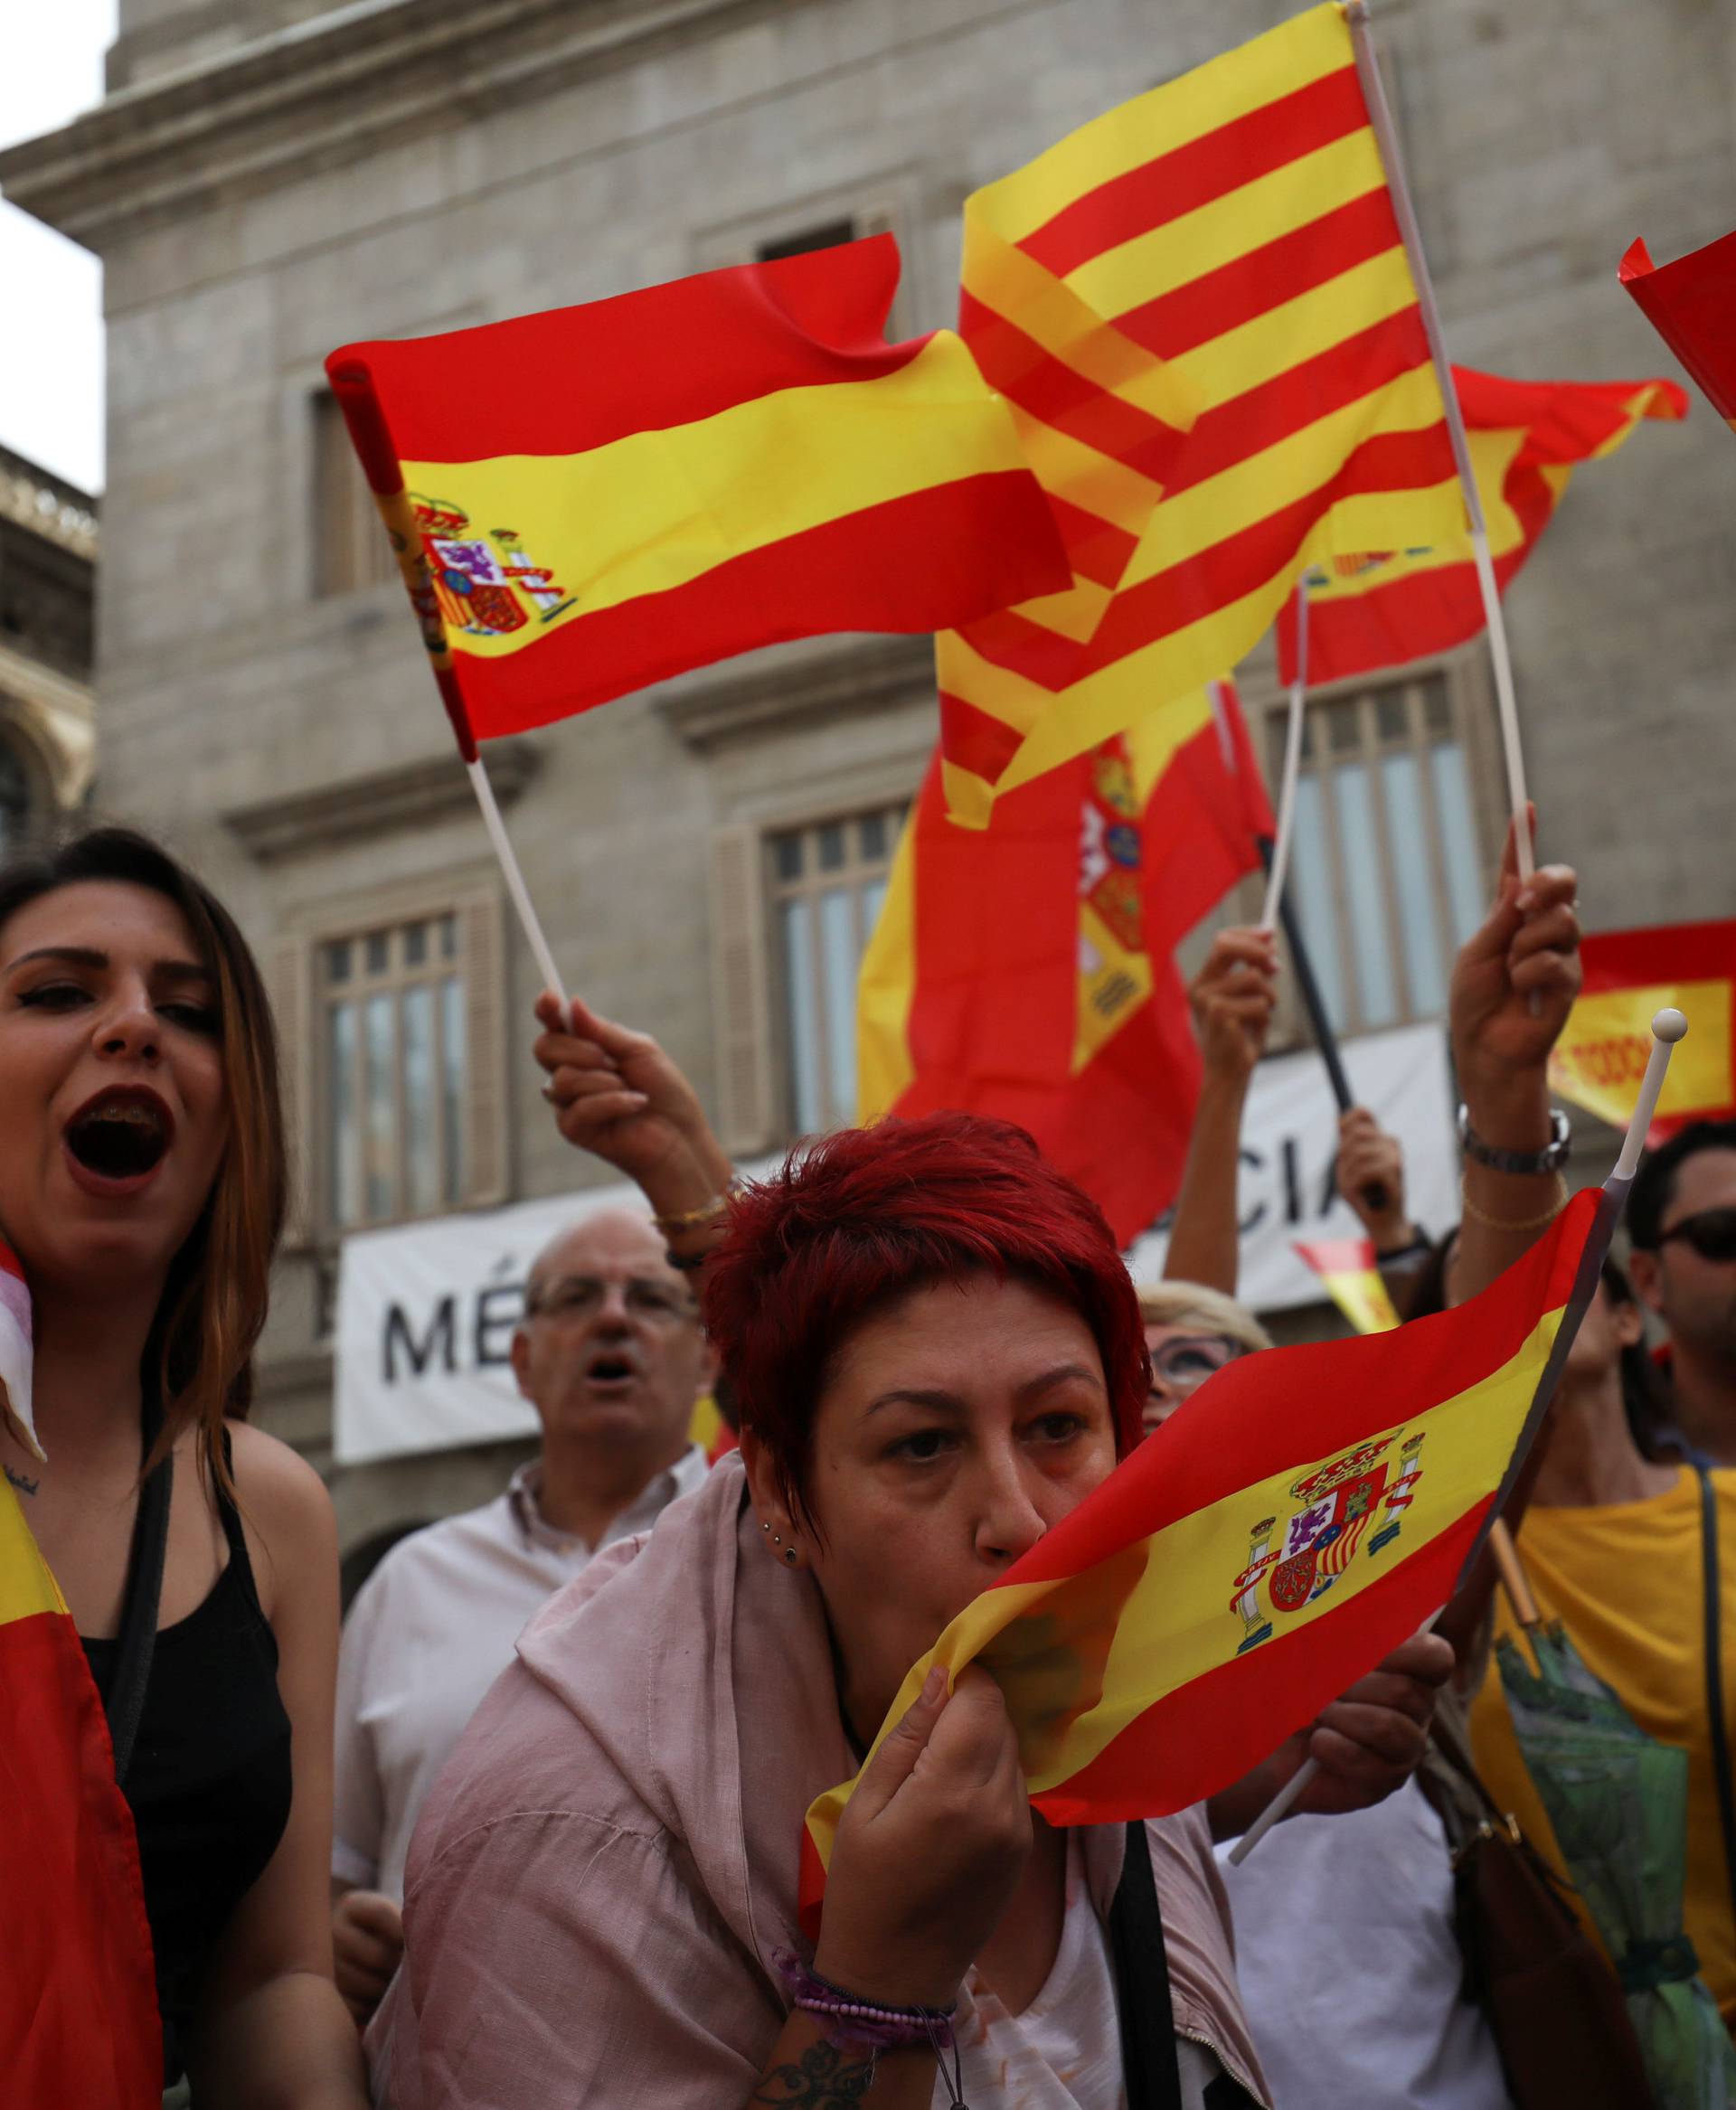 A woman kisses a Spanish flag as protesters hold Spanish and Catalan flags during a demonstration in favor of a unified Spain a day before the banned October 1 independence referendum, in Barcelona